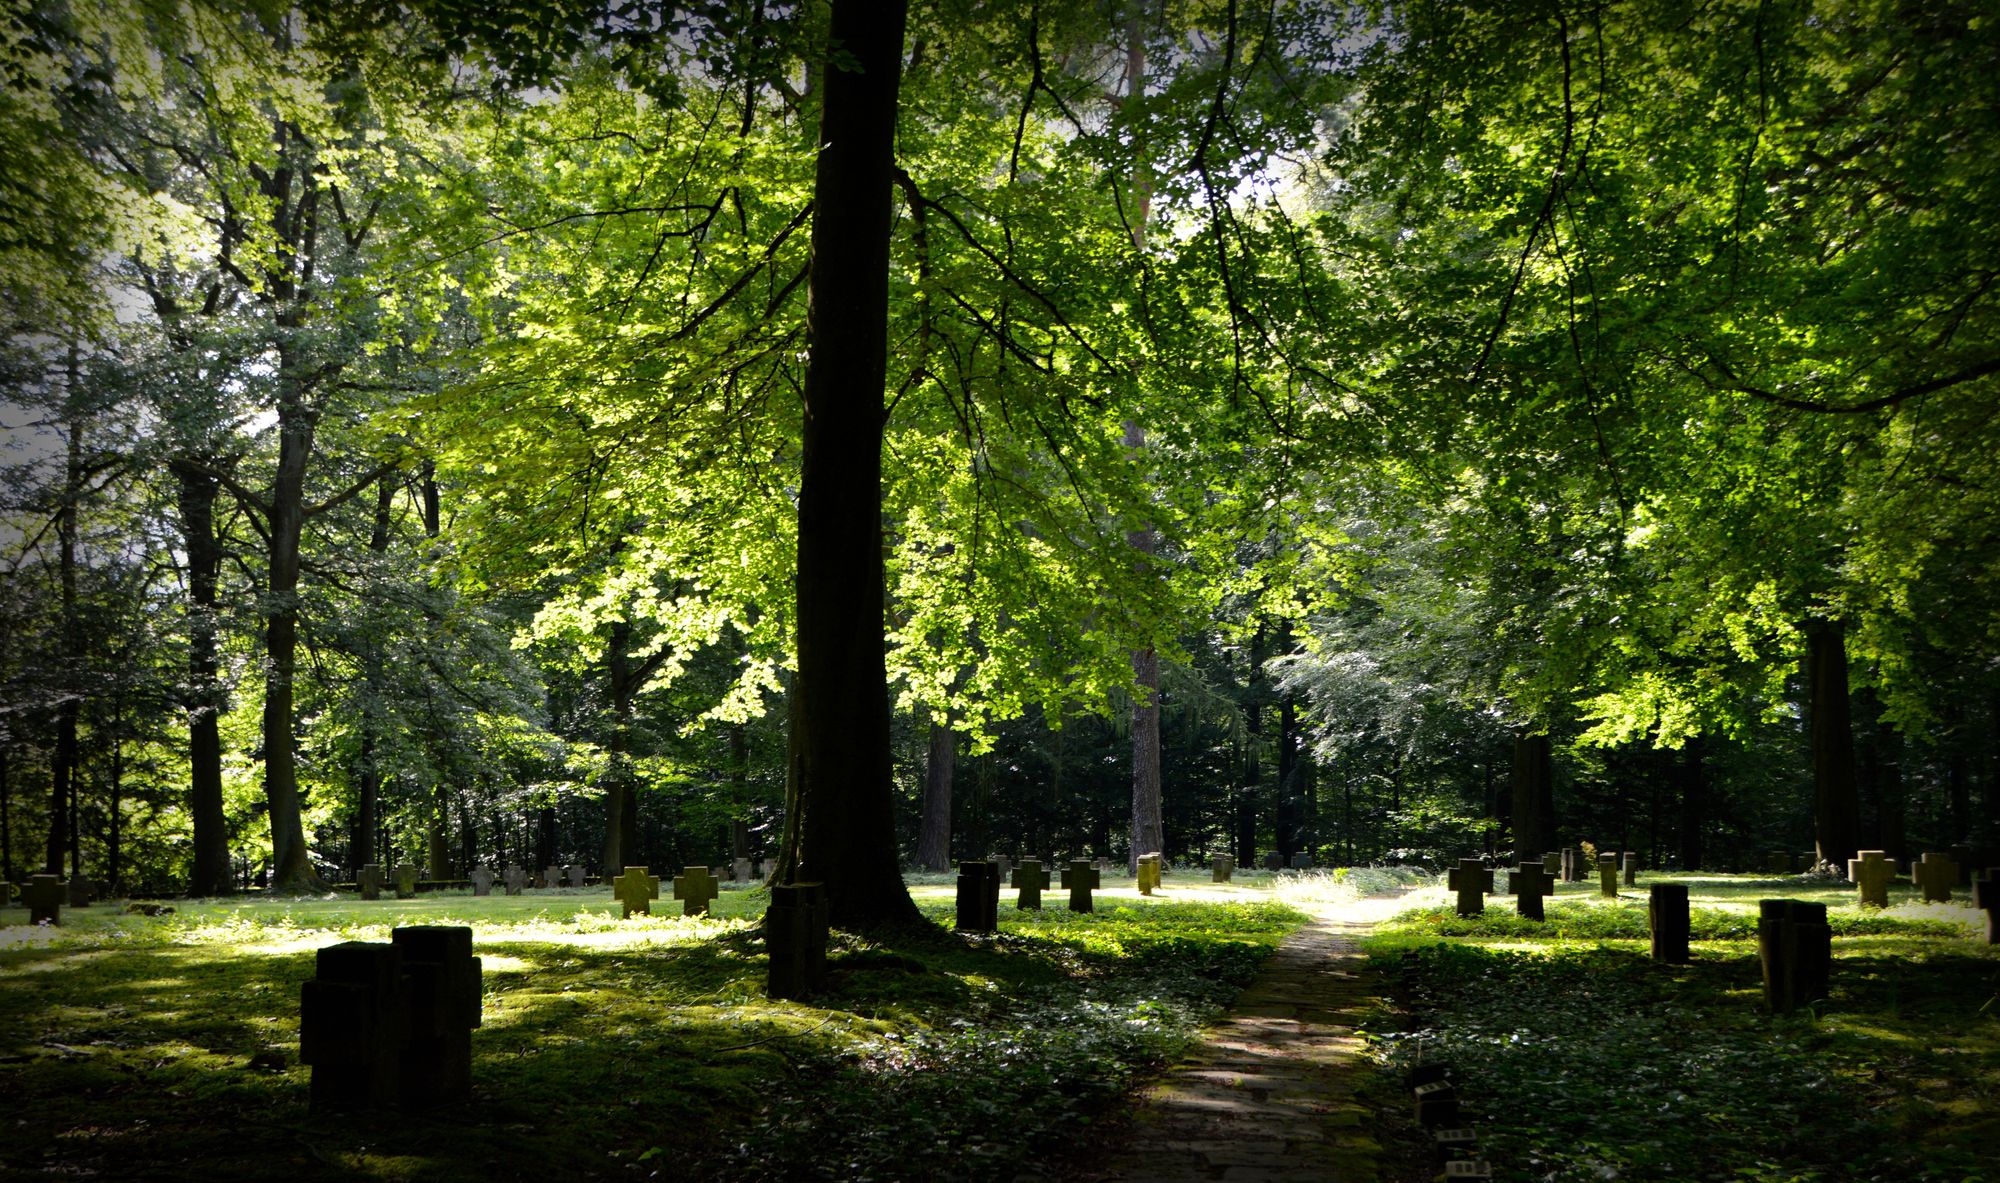 How to Make Eco-friendly Funeral Choices